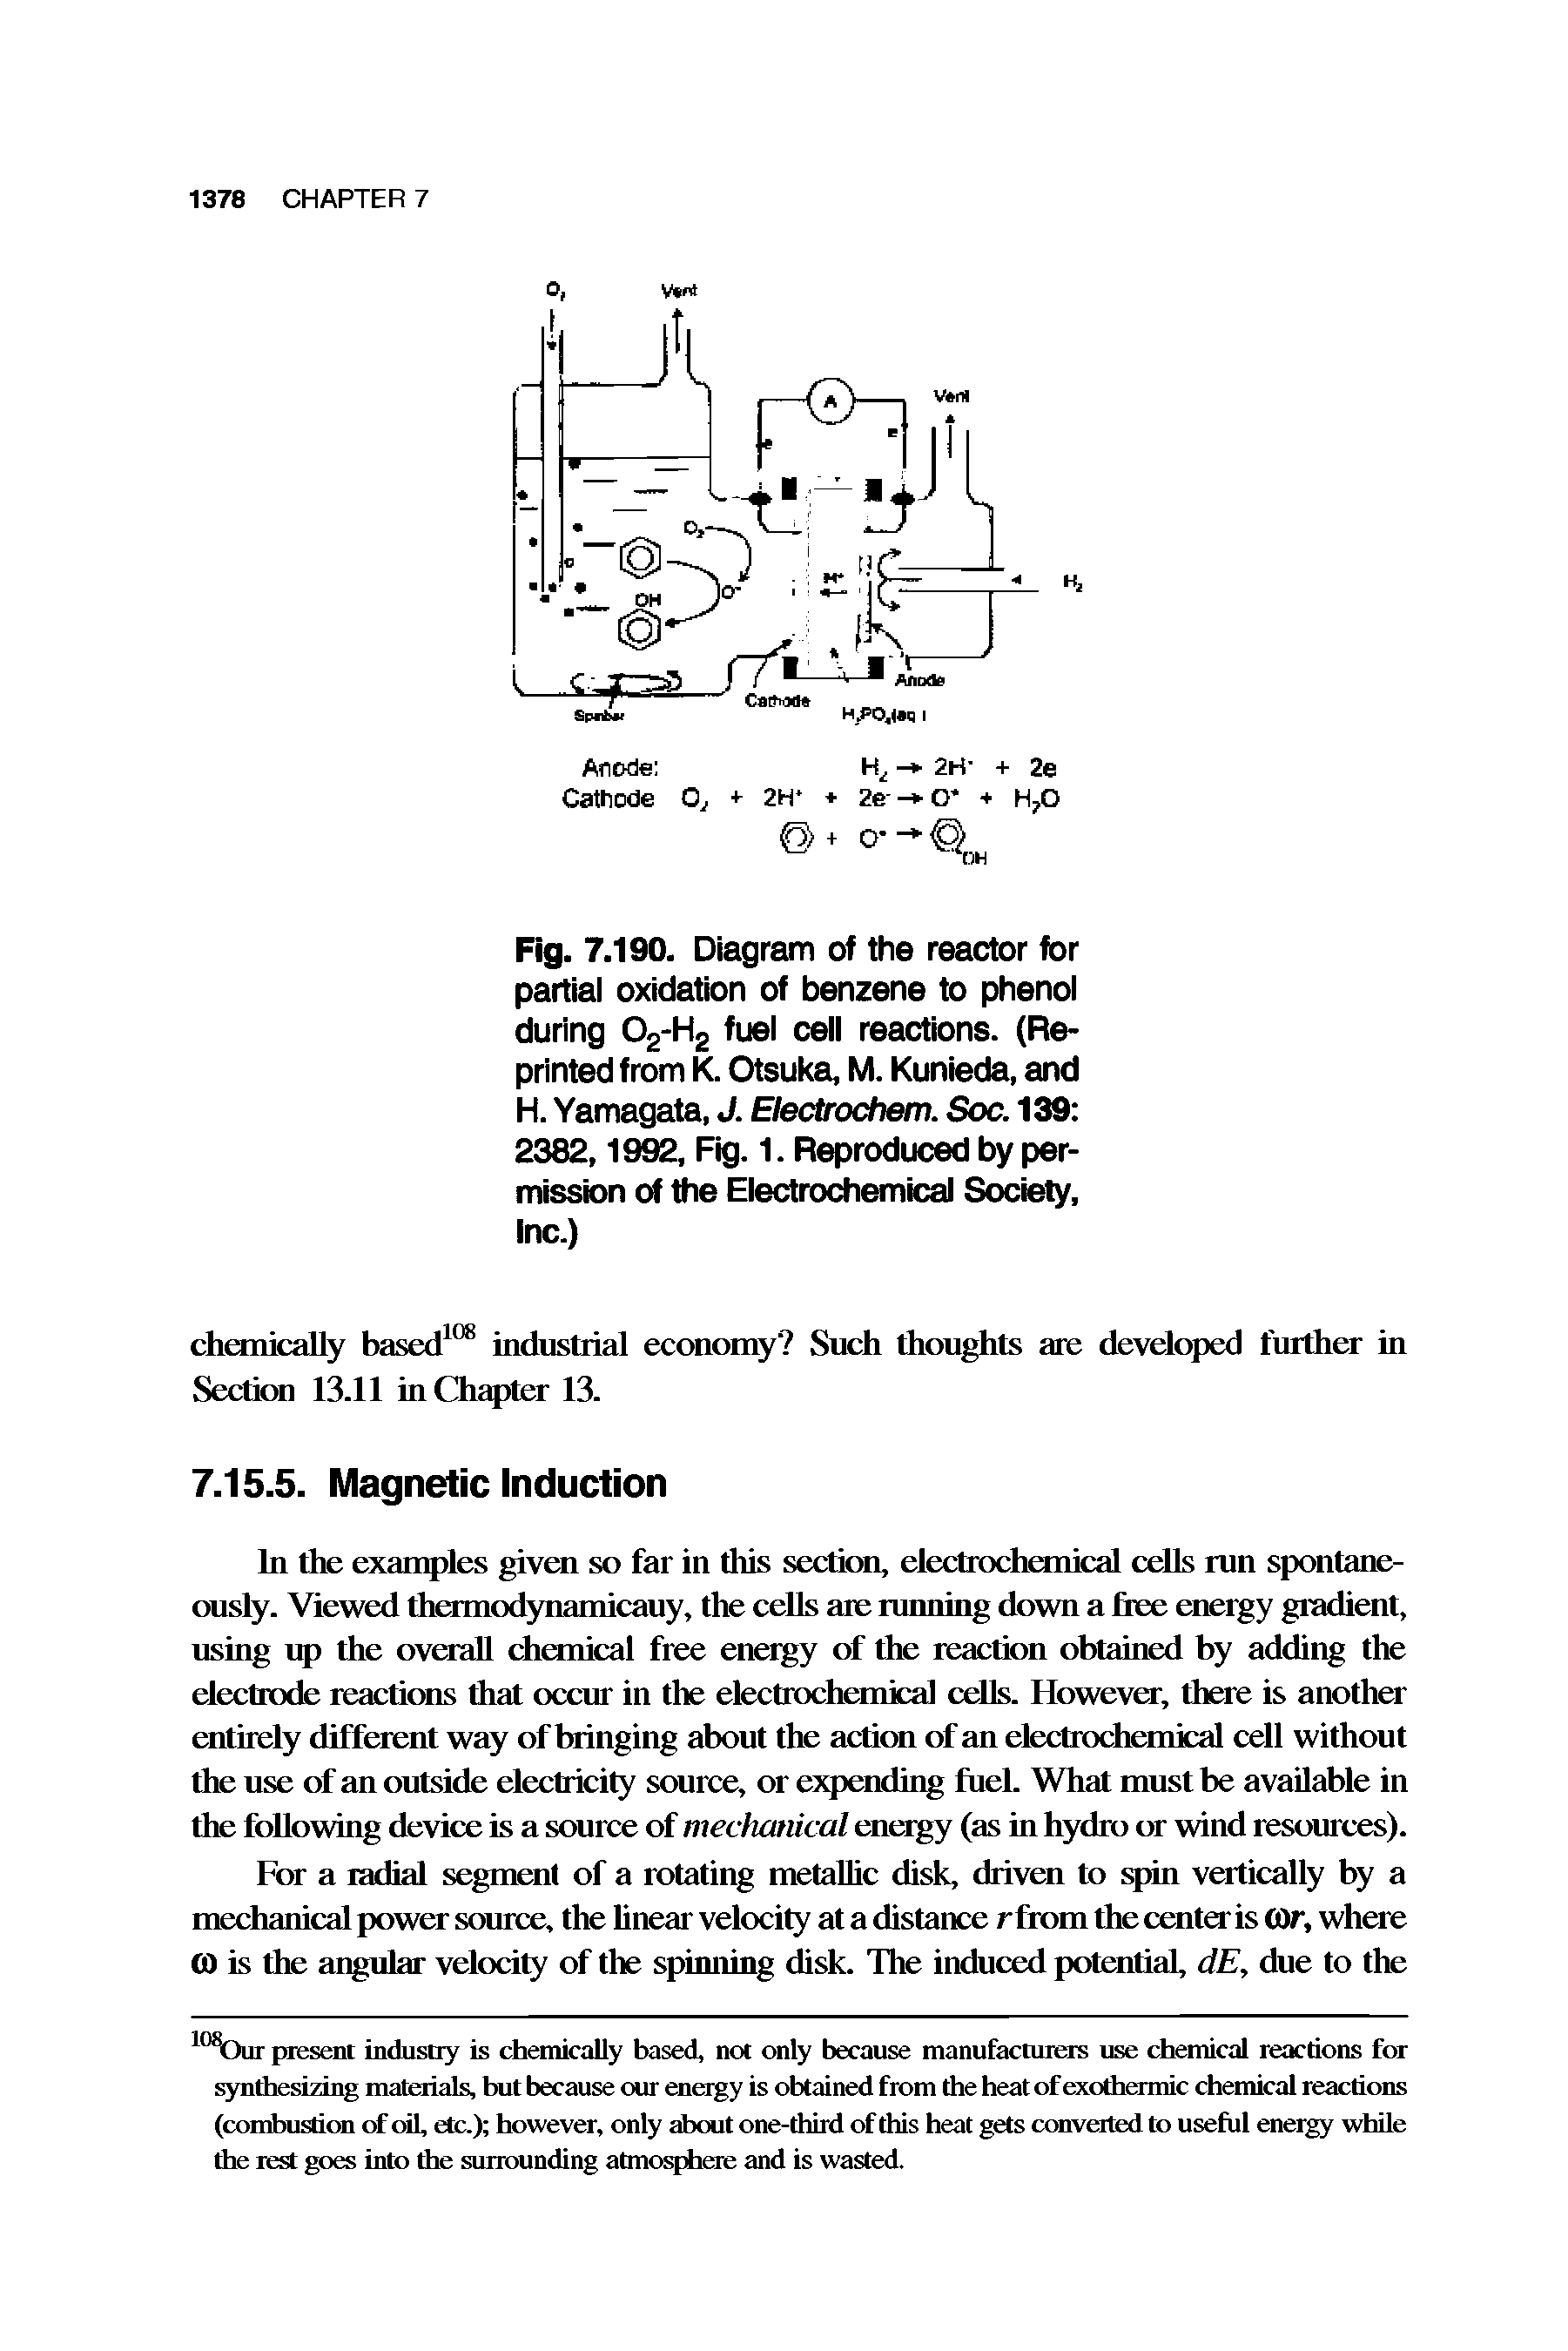 Fig. 7.190. Diagram of the reactor for partial oxidation of benzene to phenol during 02-H2 fuel cell reactions. (Reprinted from K. Otsuka, M. Kunieda, and H. Yamagata, J. Electrochem. Soc. 139 2382,1992, Fig. 1. Reproduced by permission of the Electrochemical Society, Inc.)...